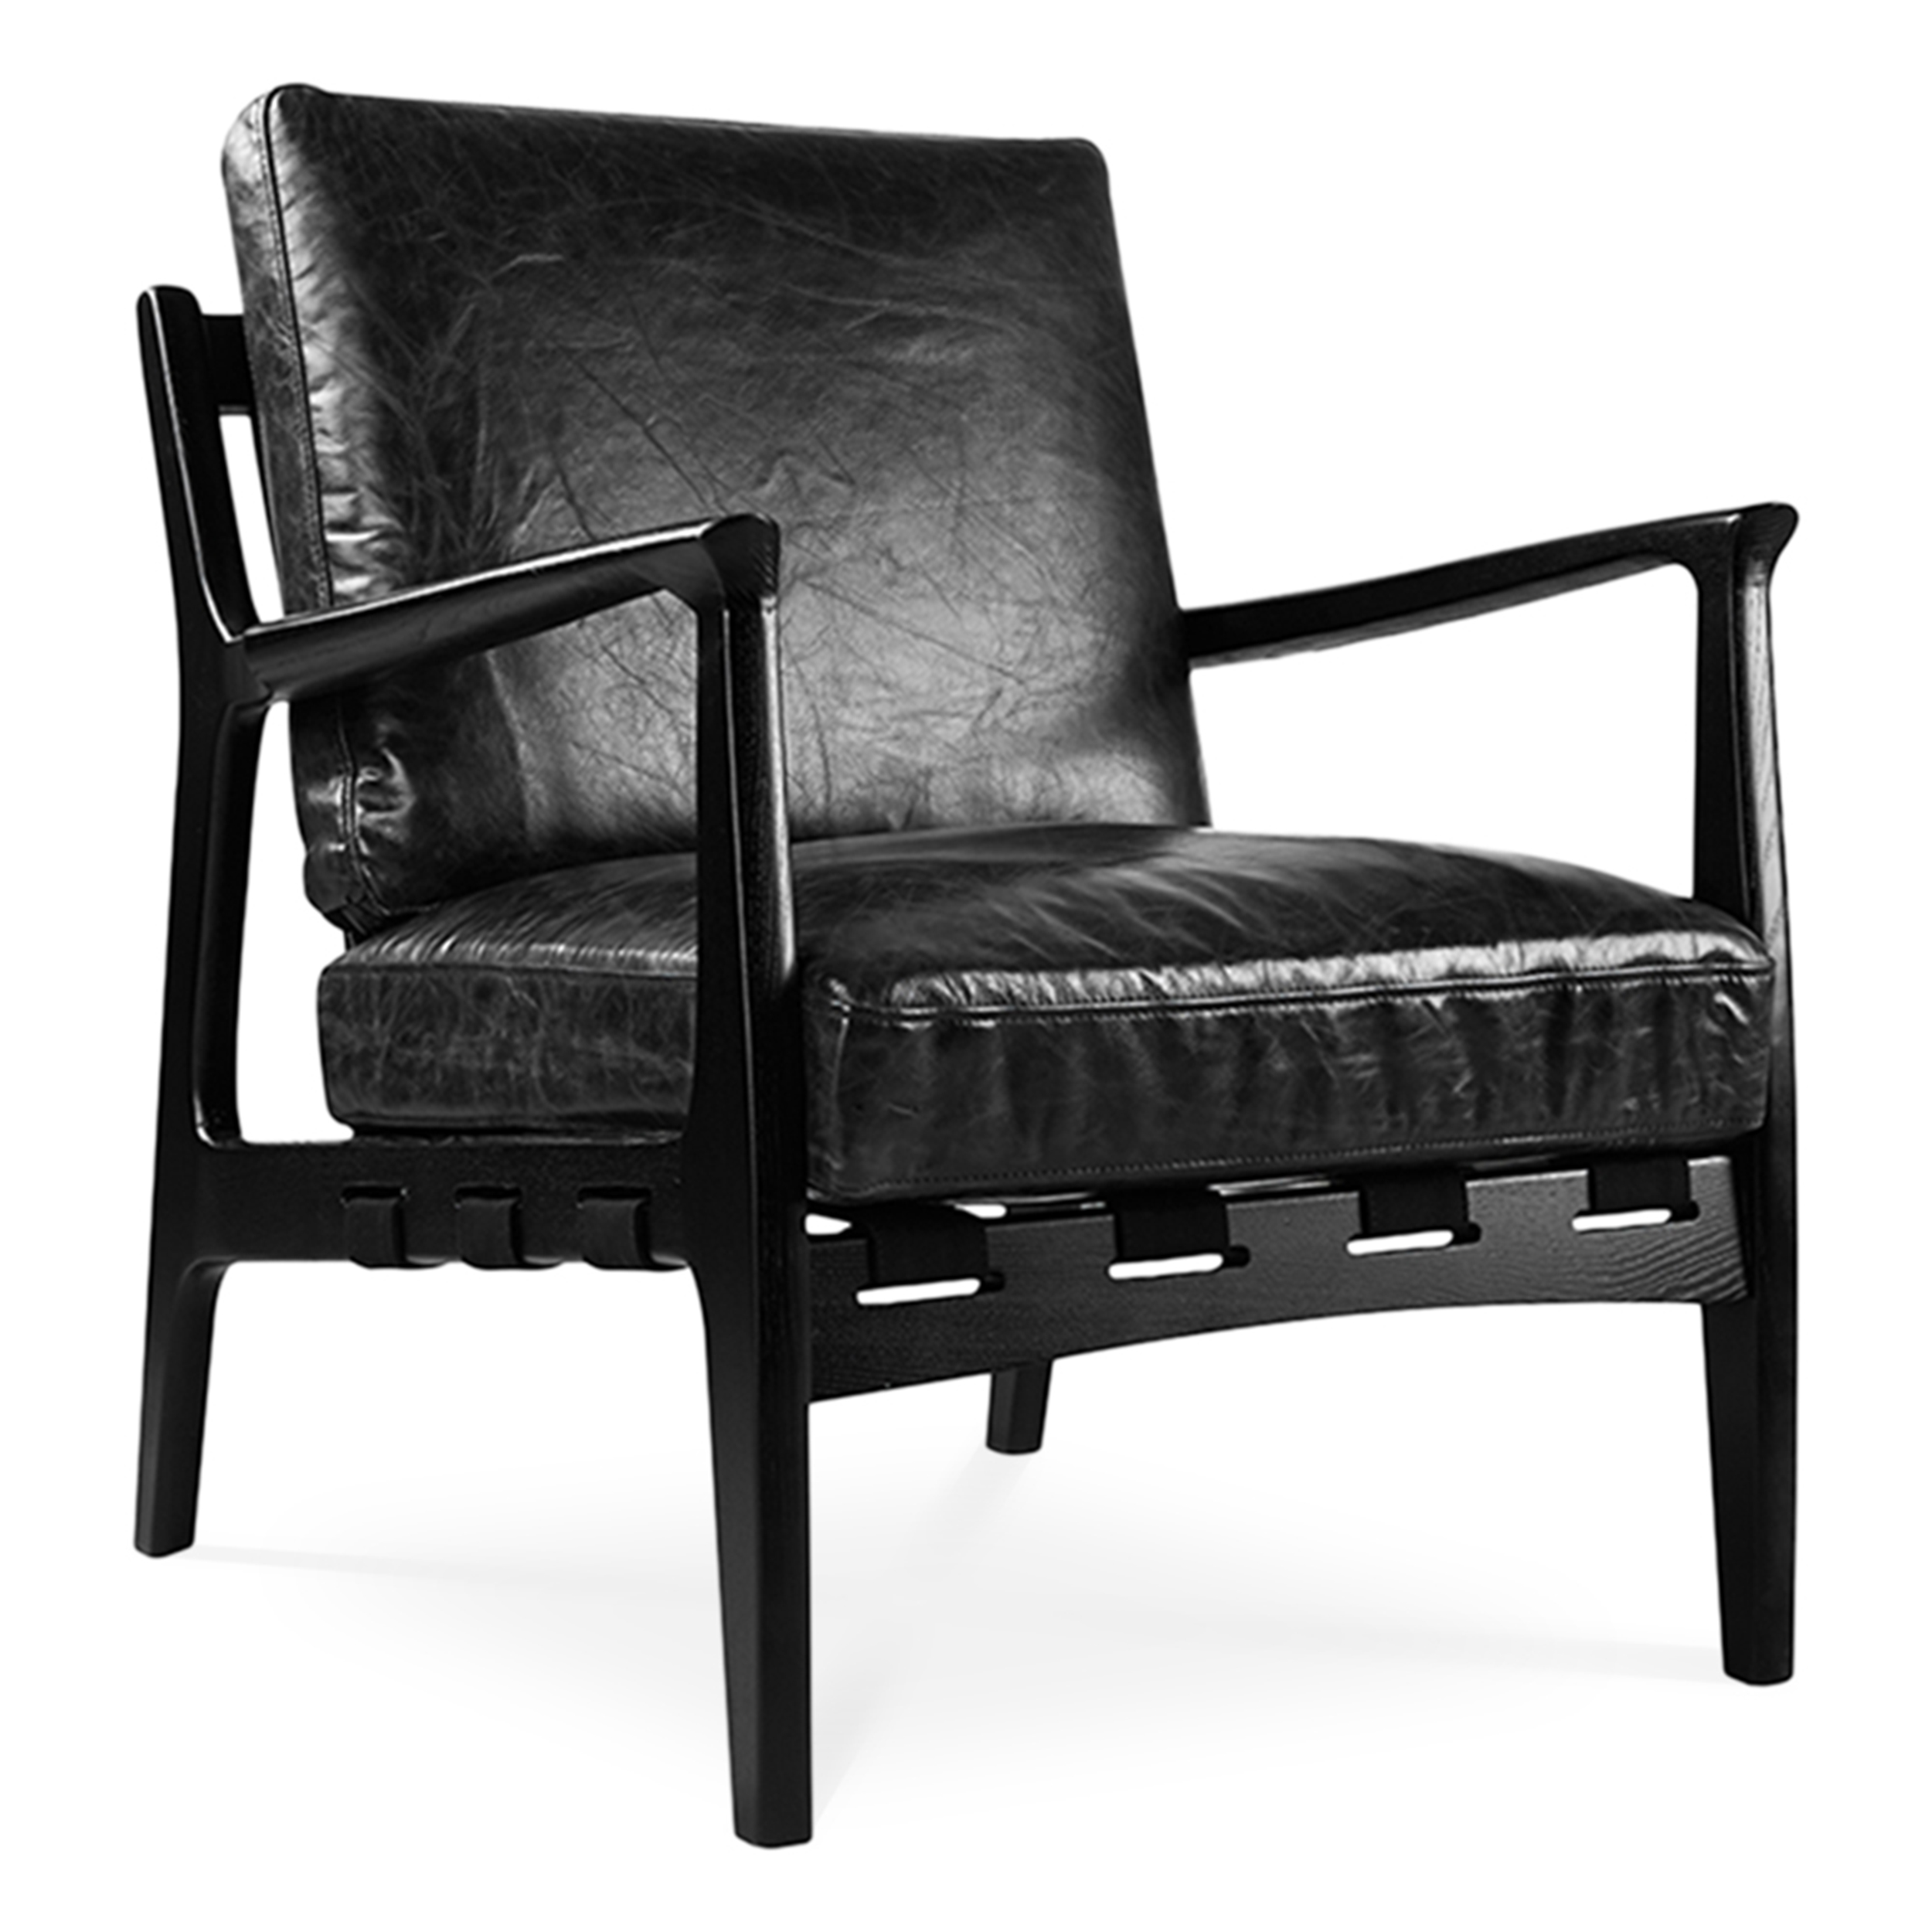 WS - At Ease armchair - Black & Black ash (Front angle)